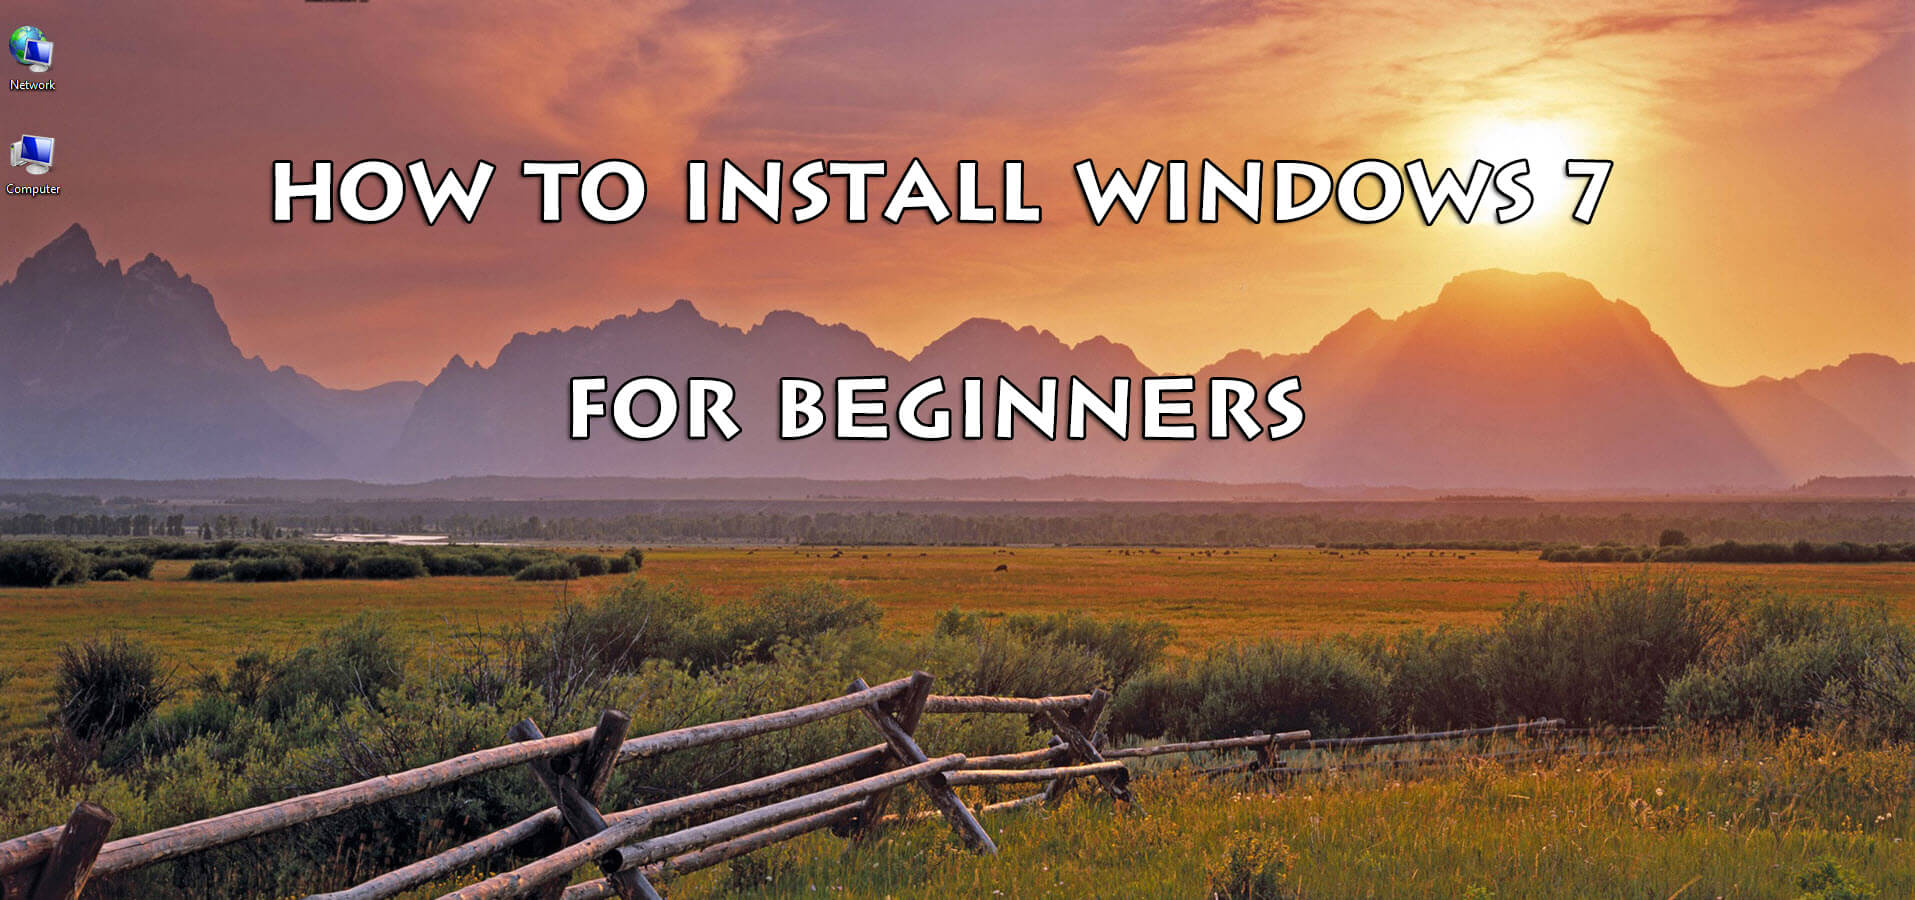 How to Install Windows 7 For Beginners